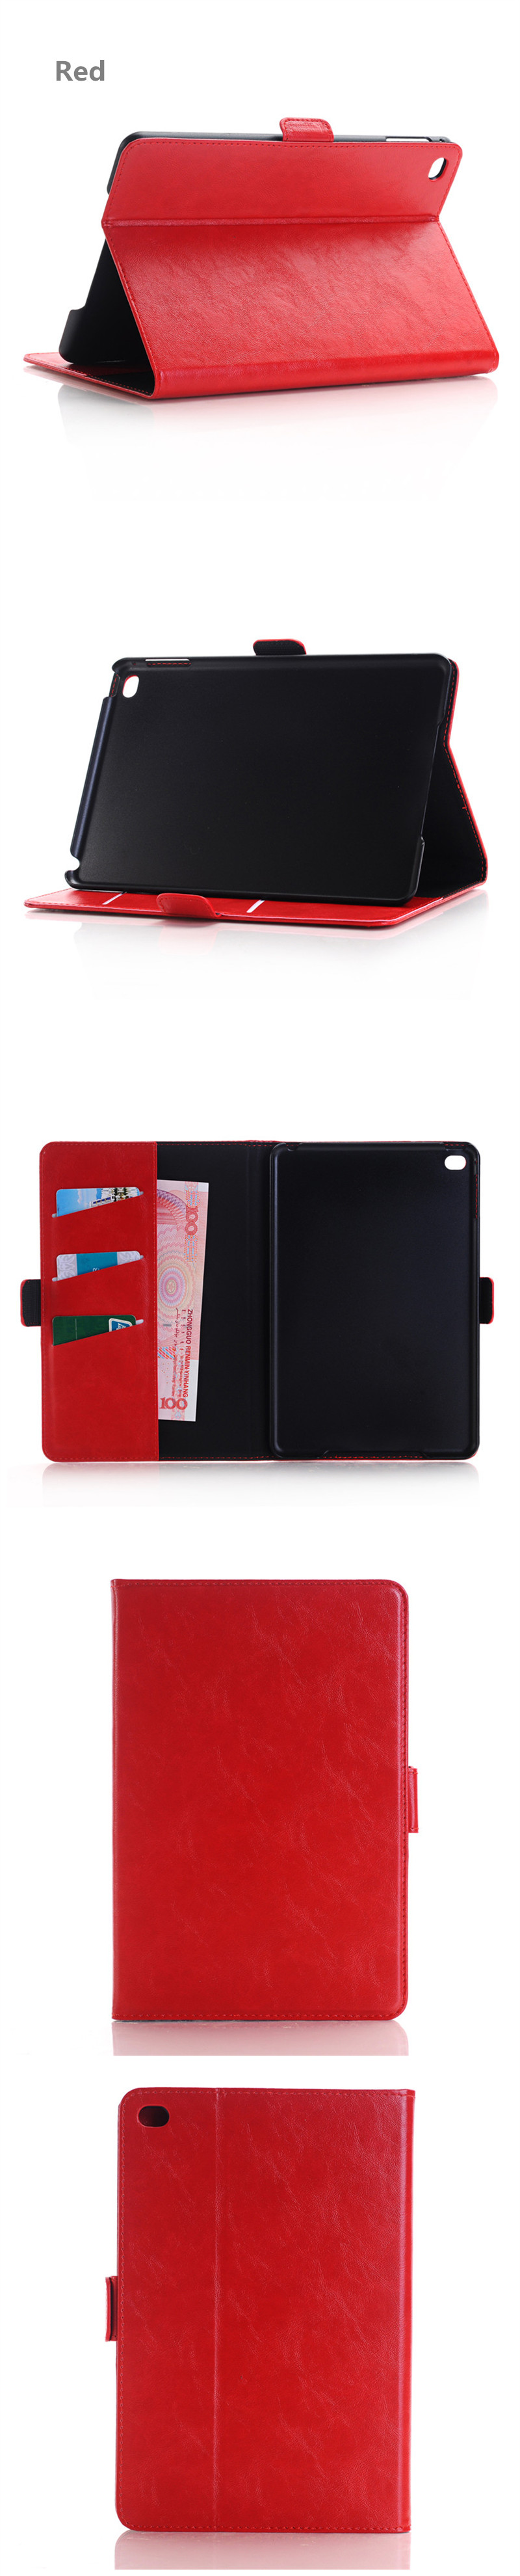 WLD-A005-Belt-Buckle-Shell-Flip-PU-Leather--Protective-Cases-For-iPad-Mini-4-1013508-6